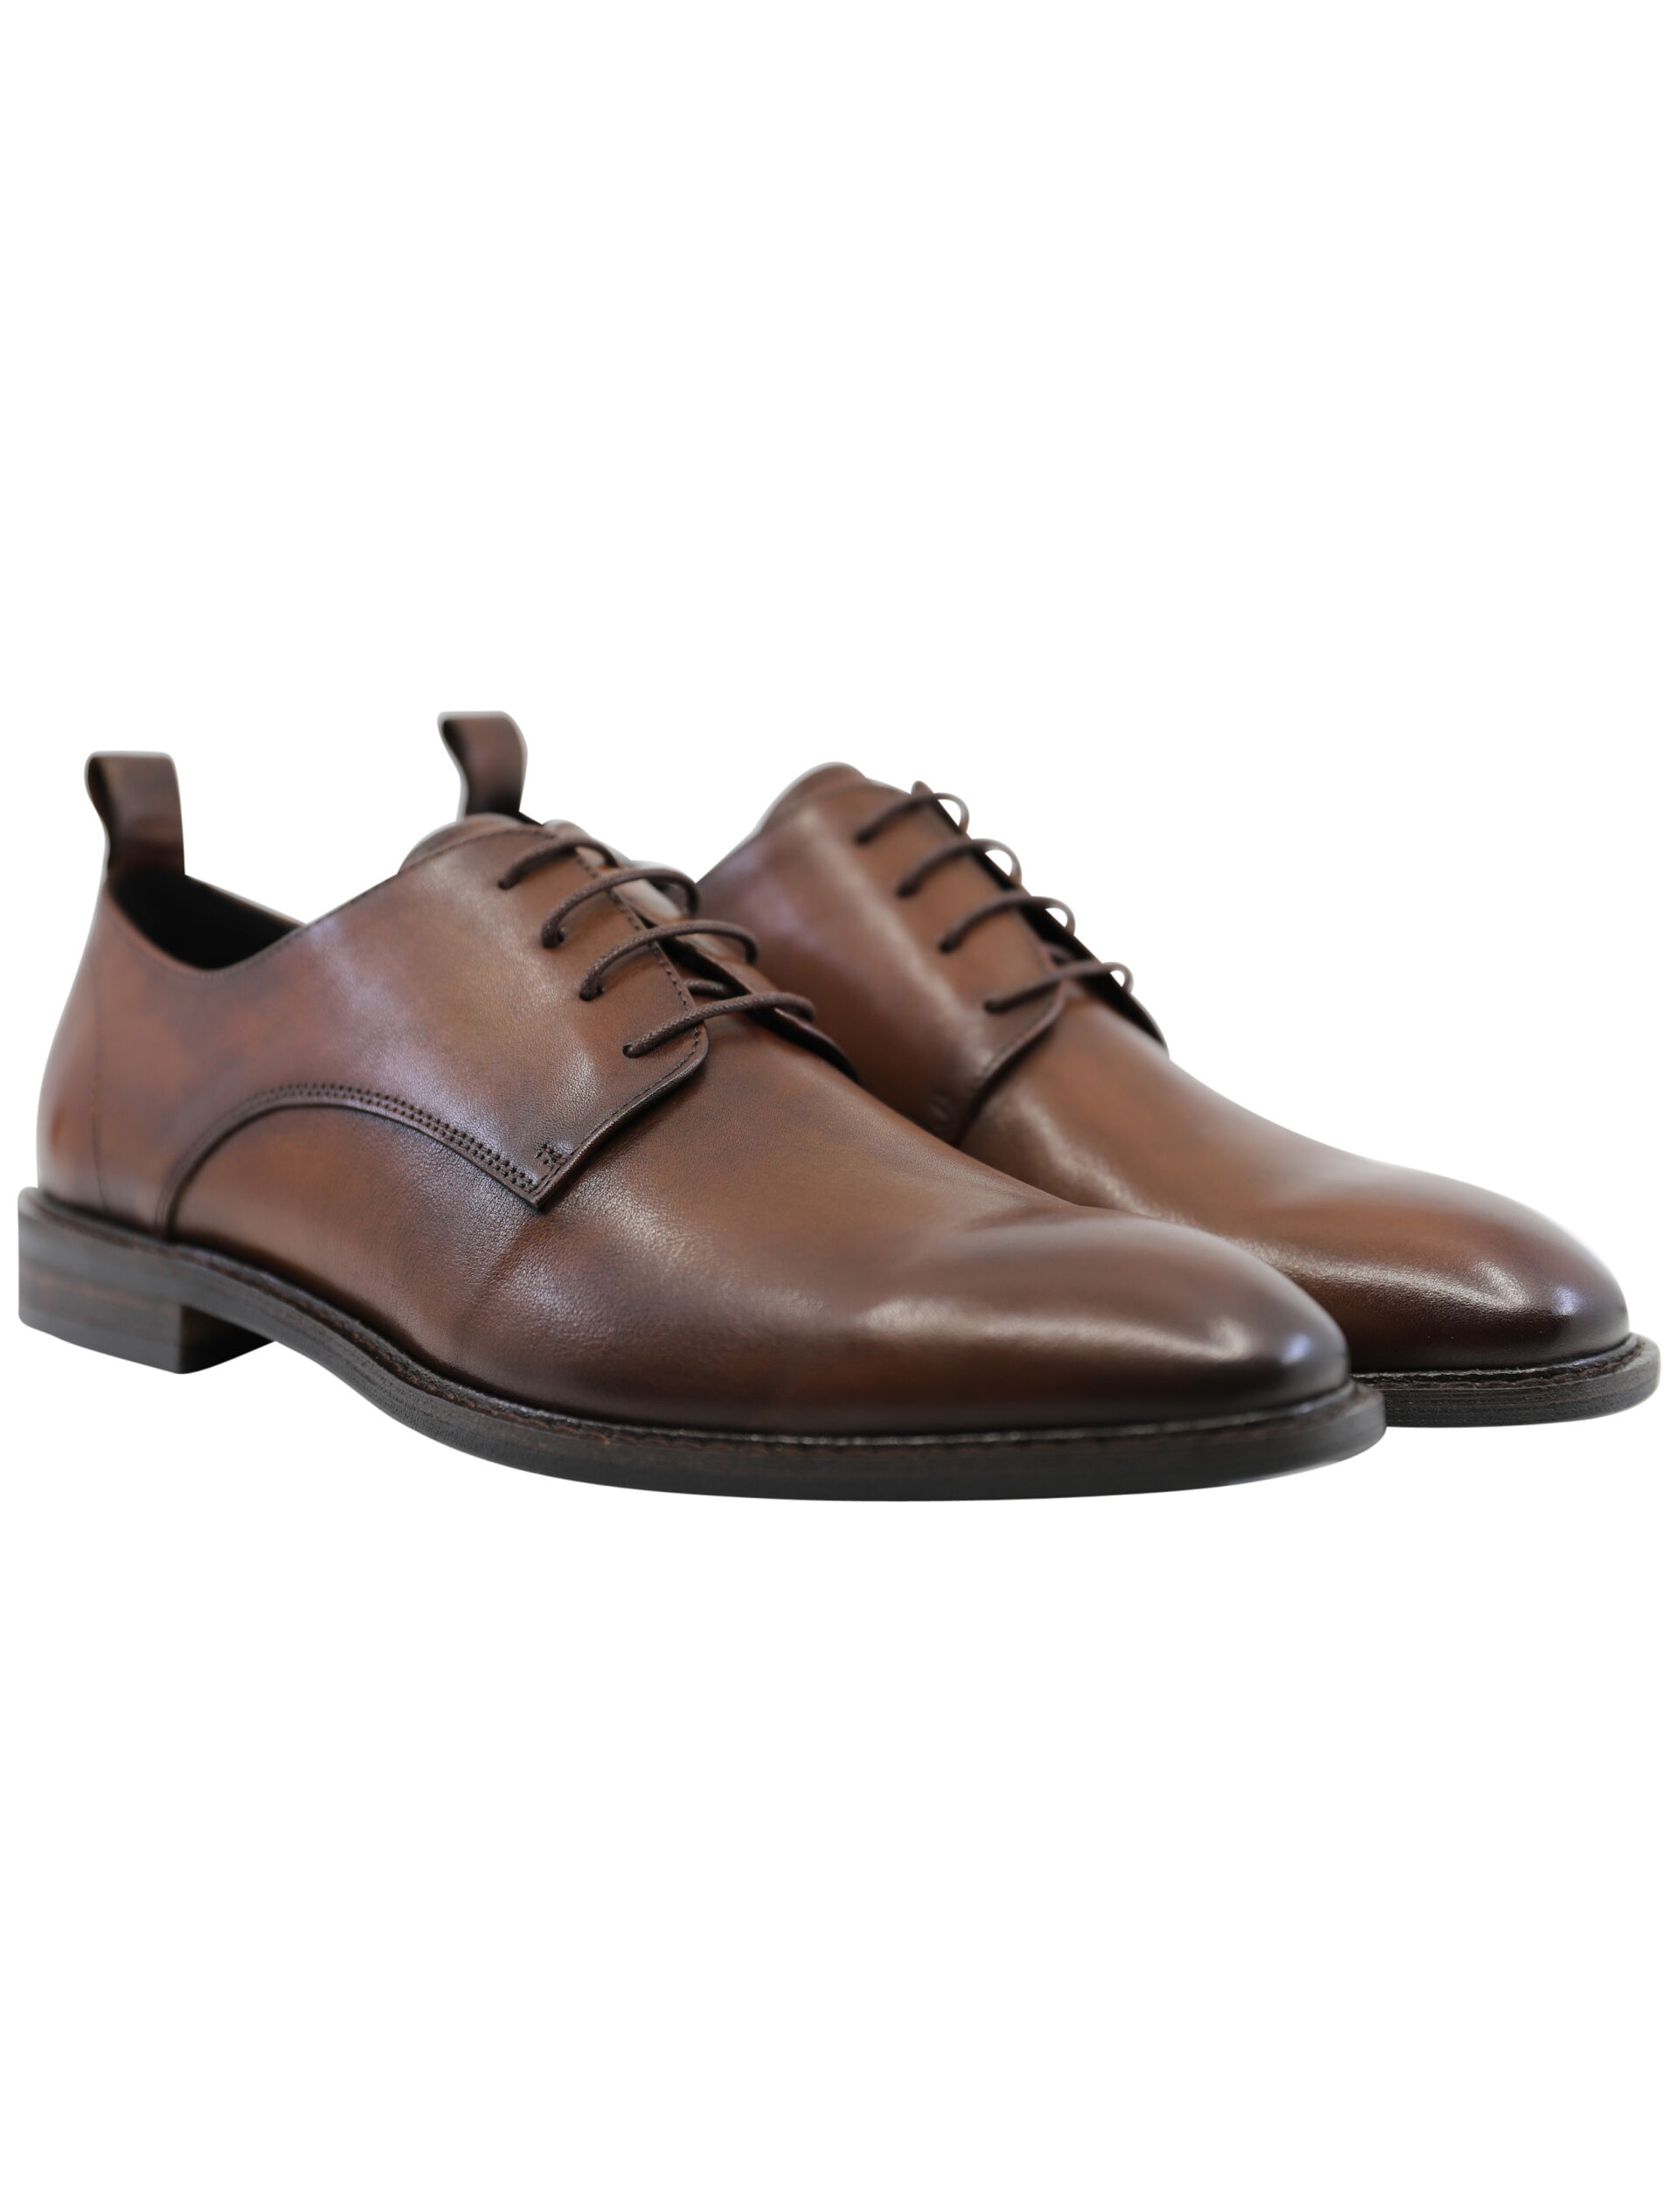 Business shoes Business shoes Brown 30-992031